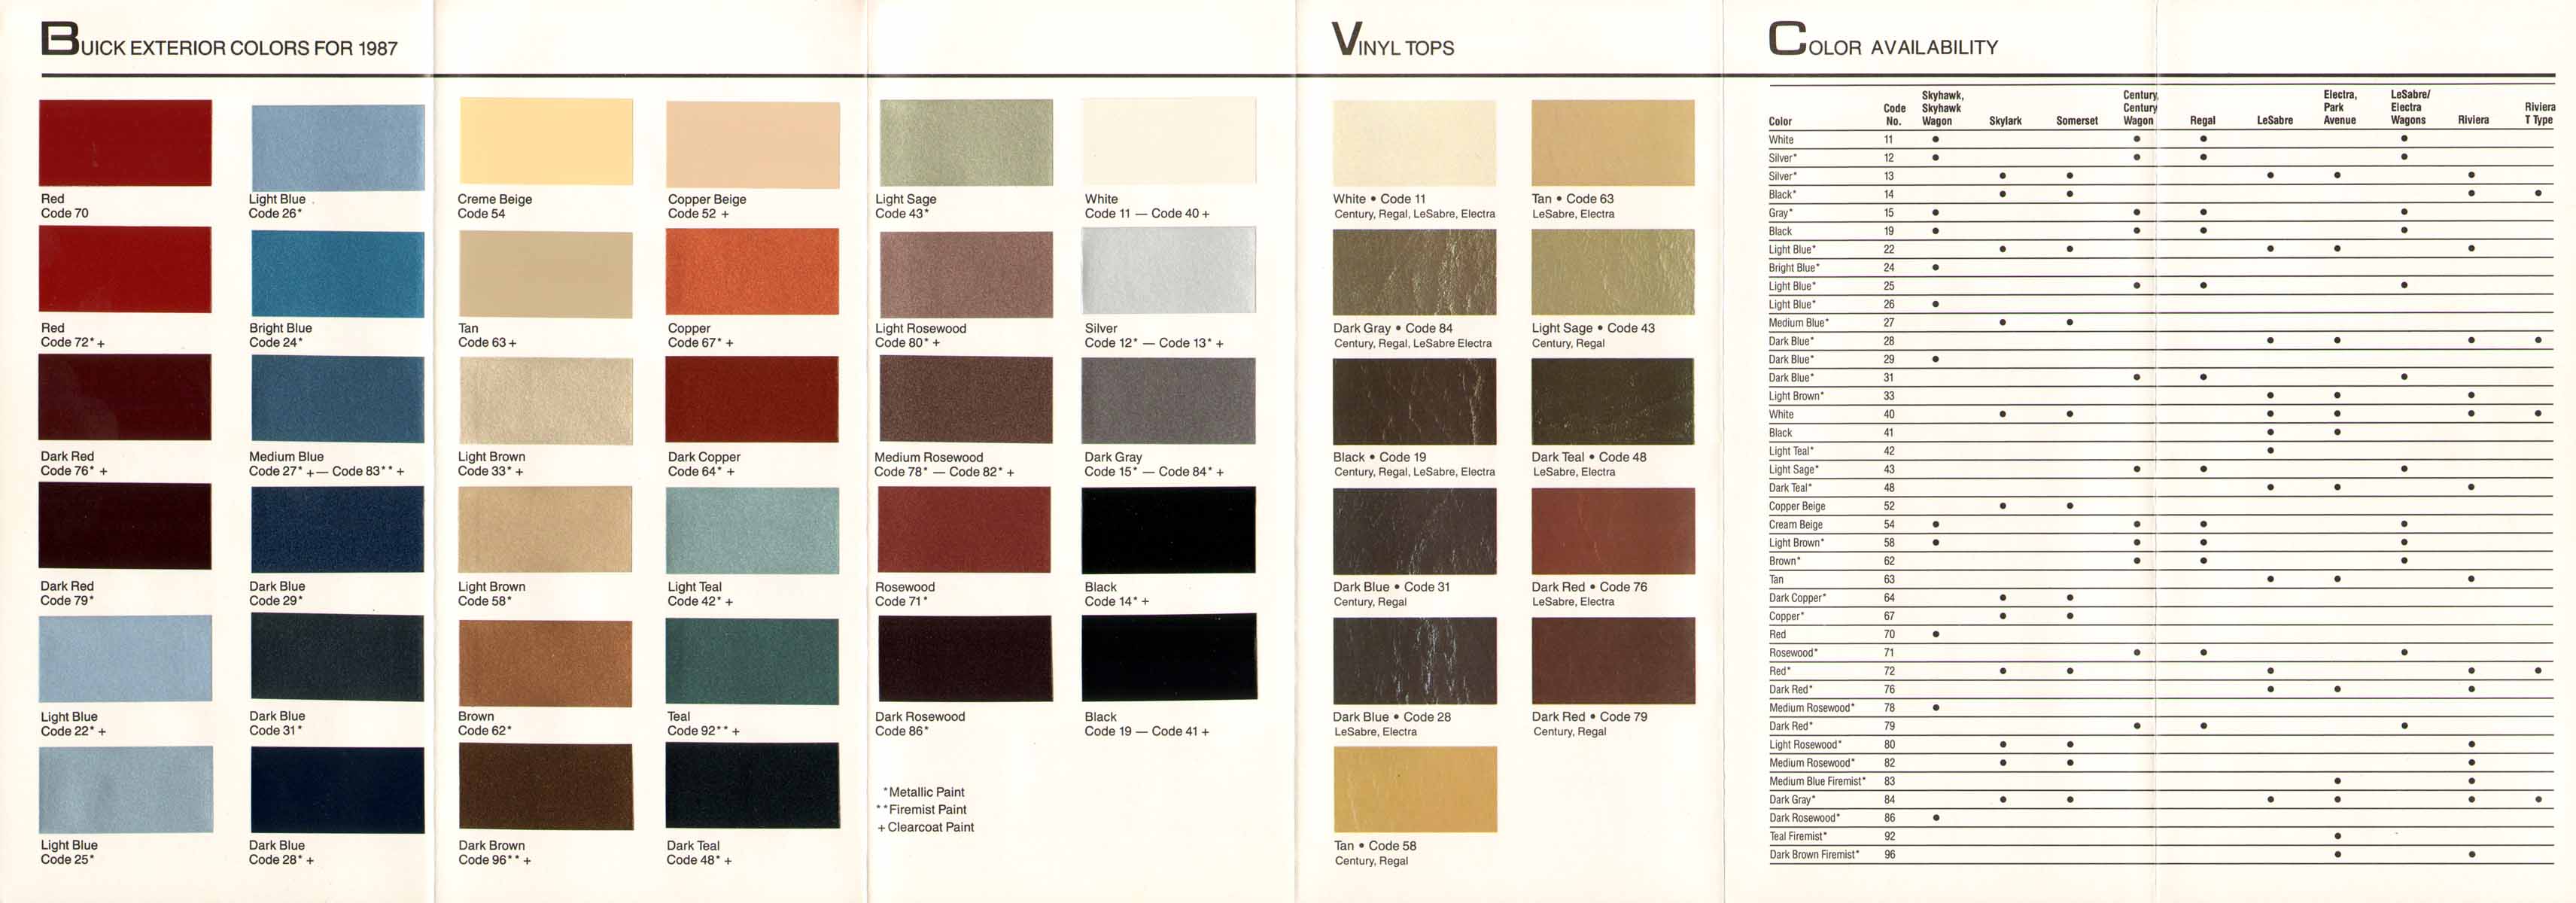 1987 Buick Exterior Colors-02 to 07